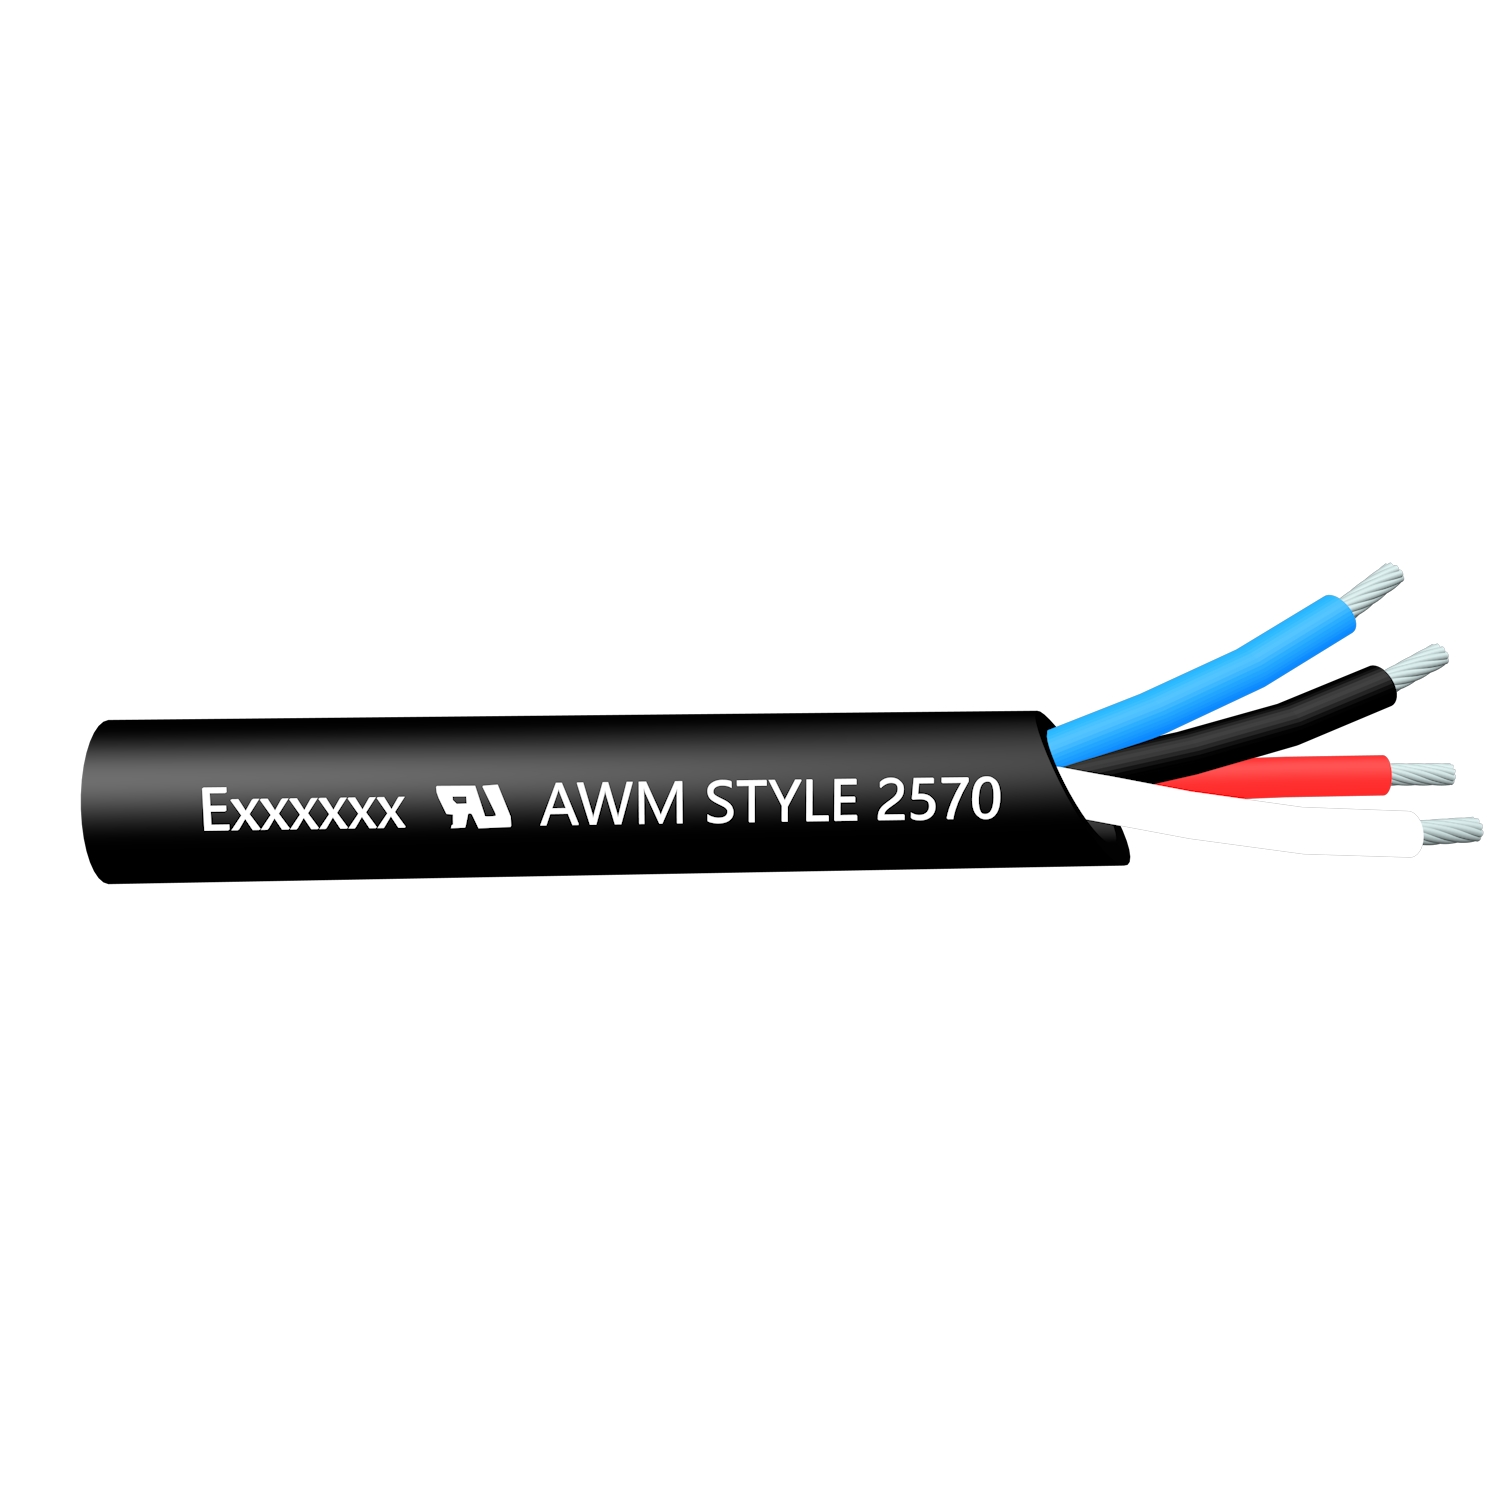 UL2570 Hook-up Wire Flame Resistant Power Delivery PVC Cable